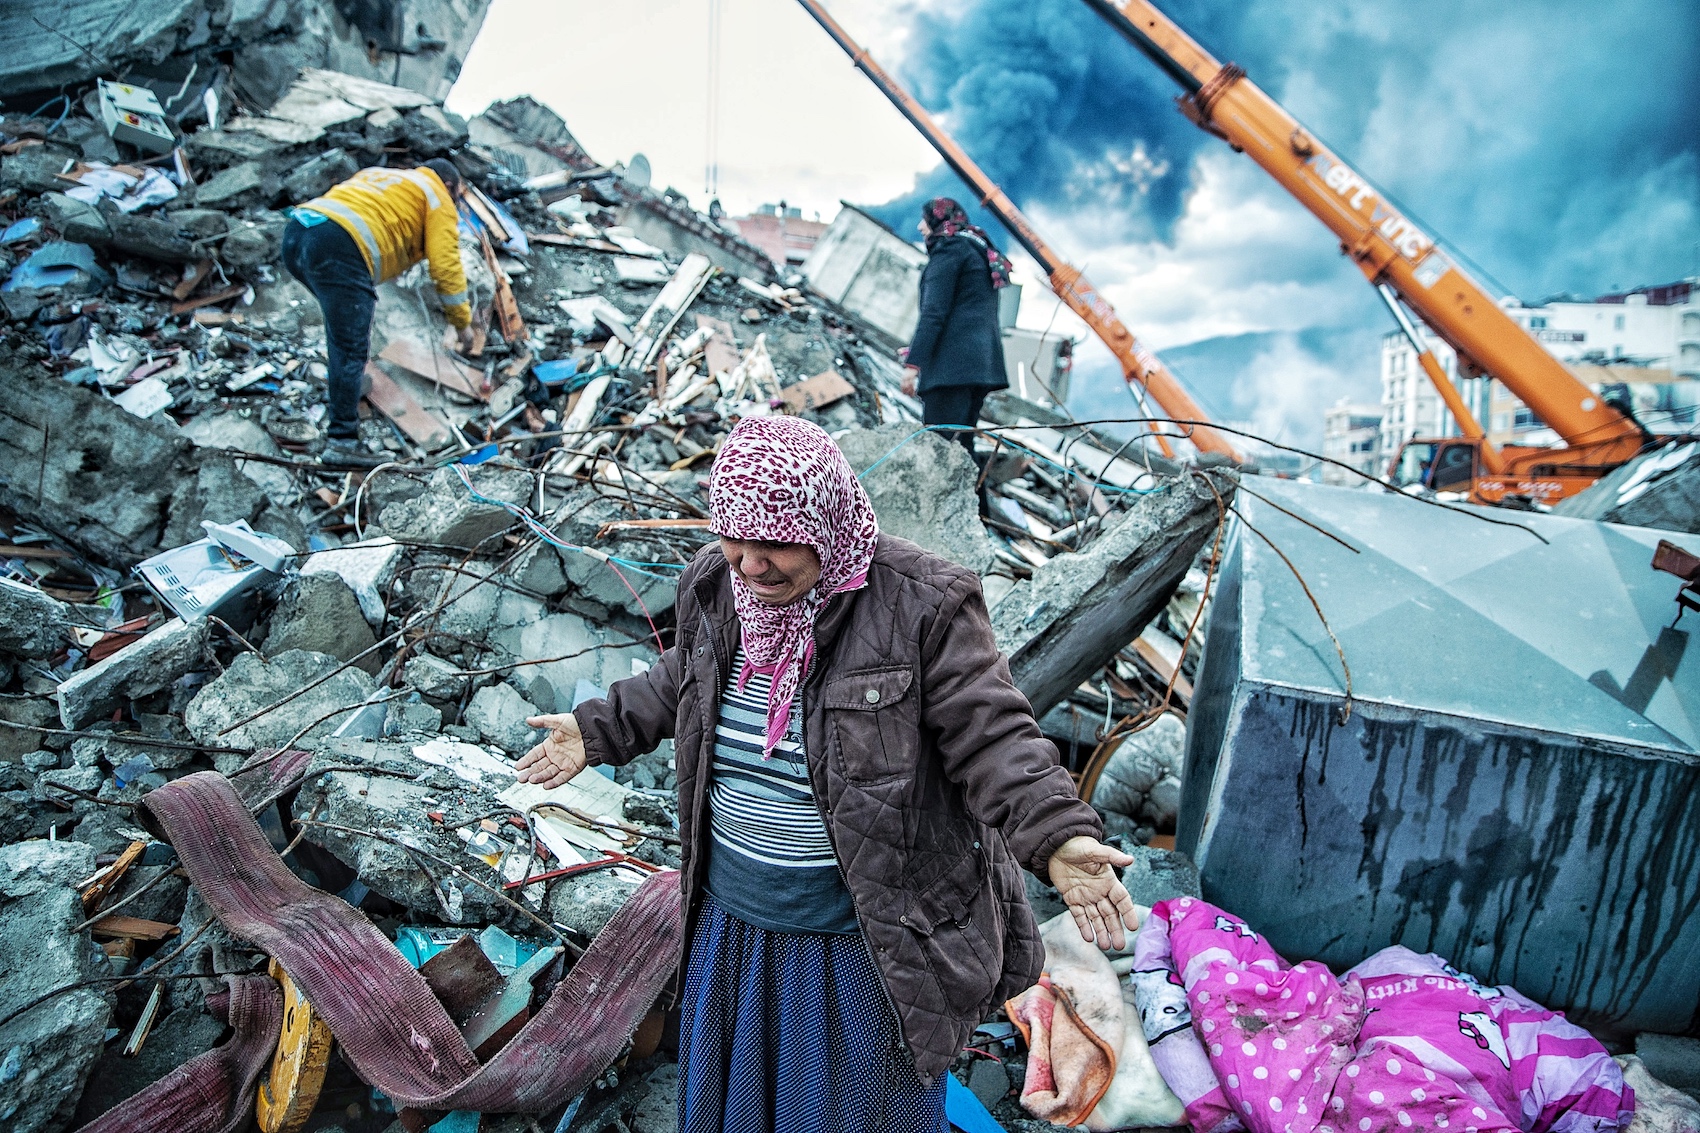 an old lady stretching out her arms standing on the collapsed buildings looking down